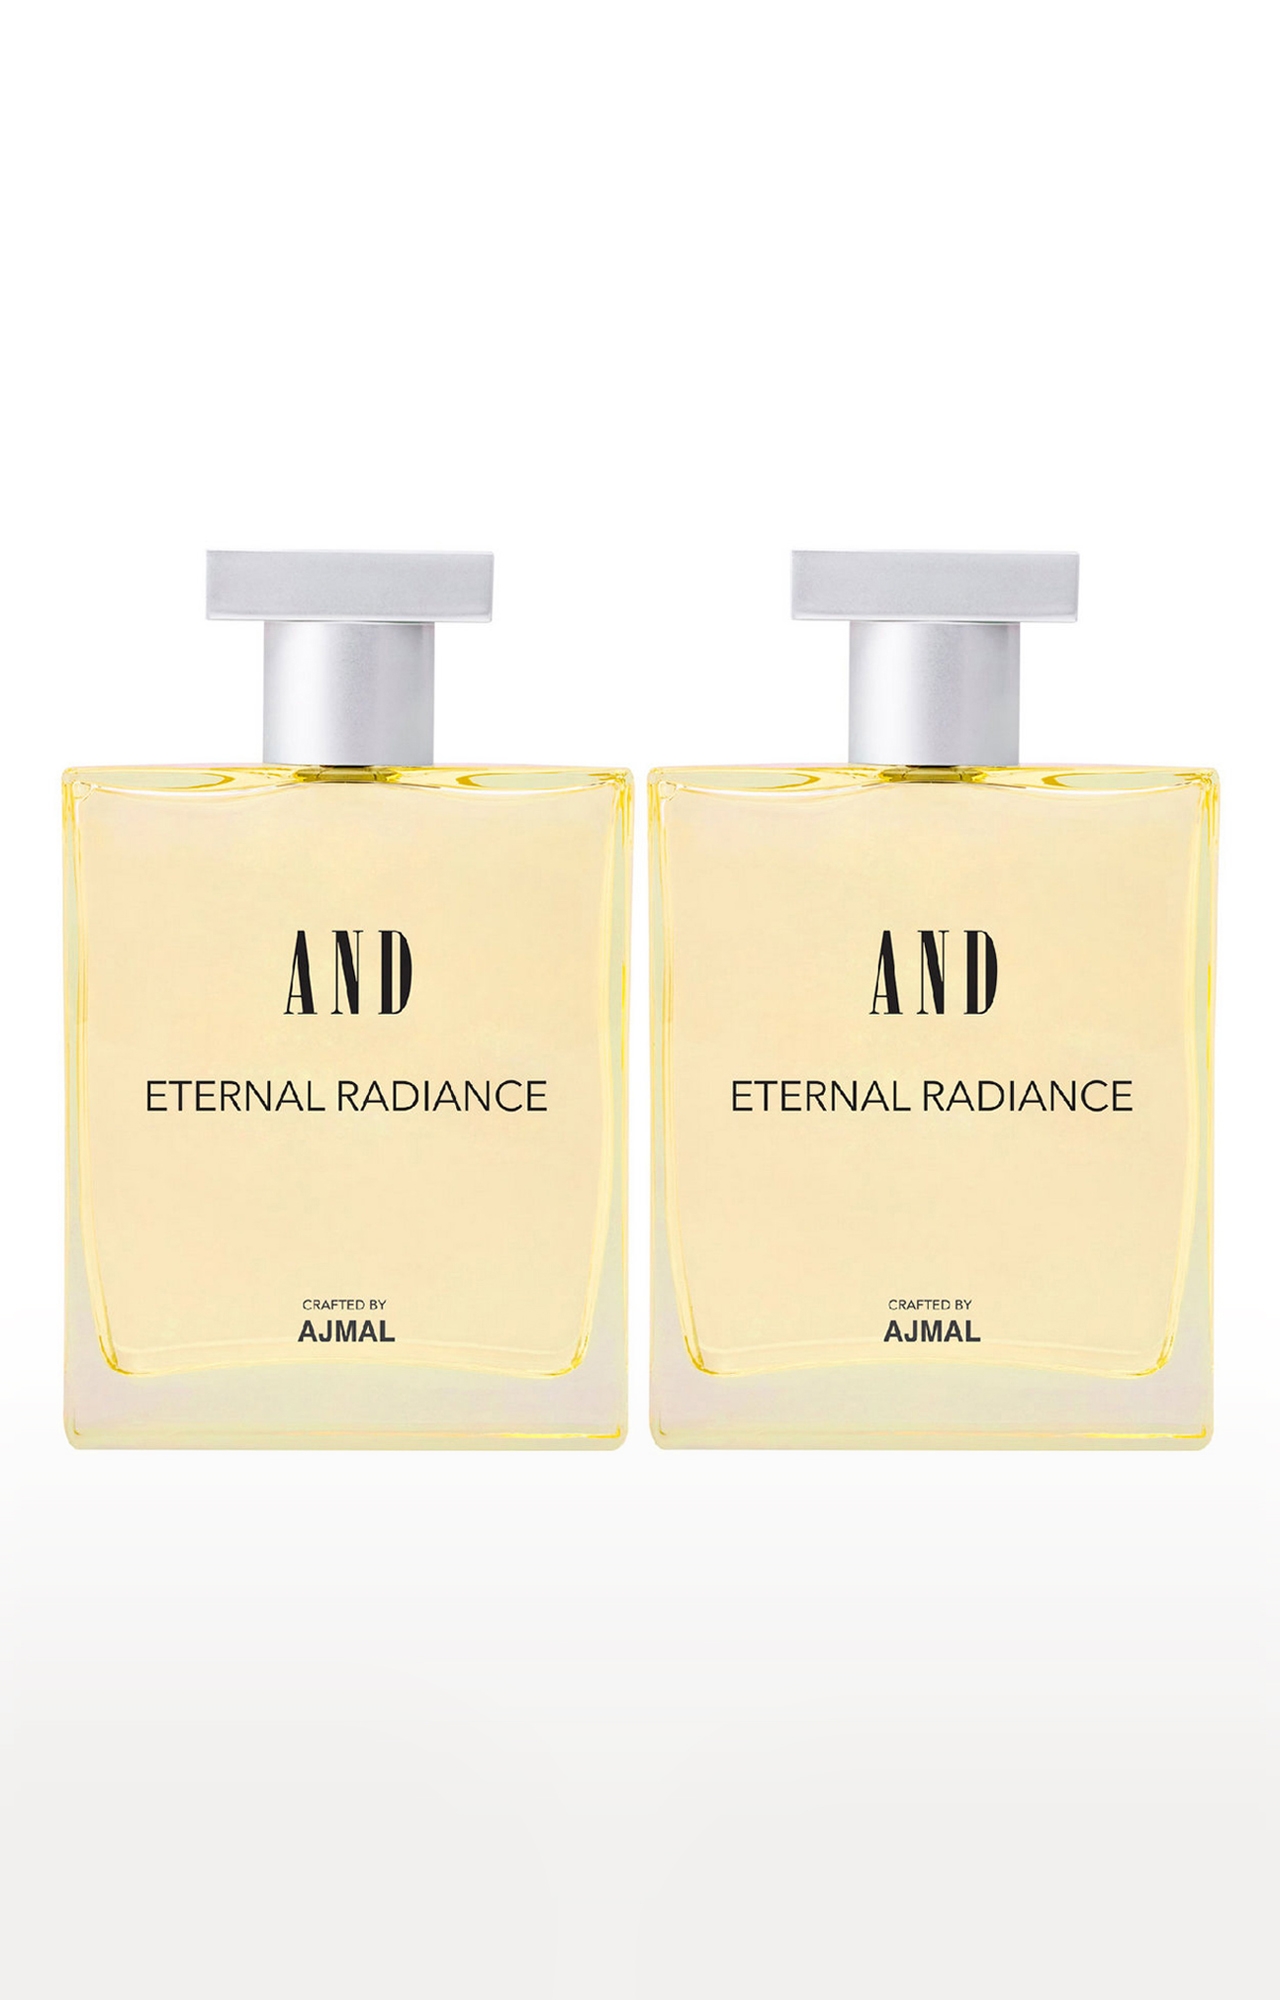 AND Eternal Radiance Pack of 2 Eau De Parfum 100ML each for Women Crafted by Ajmal 